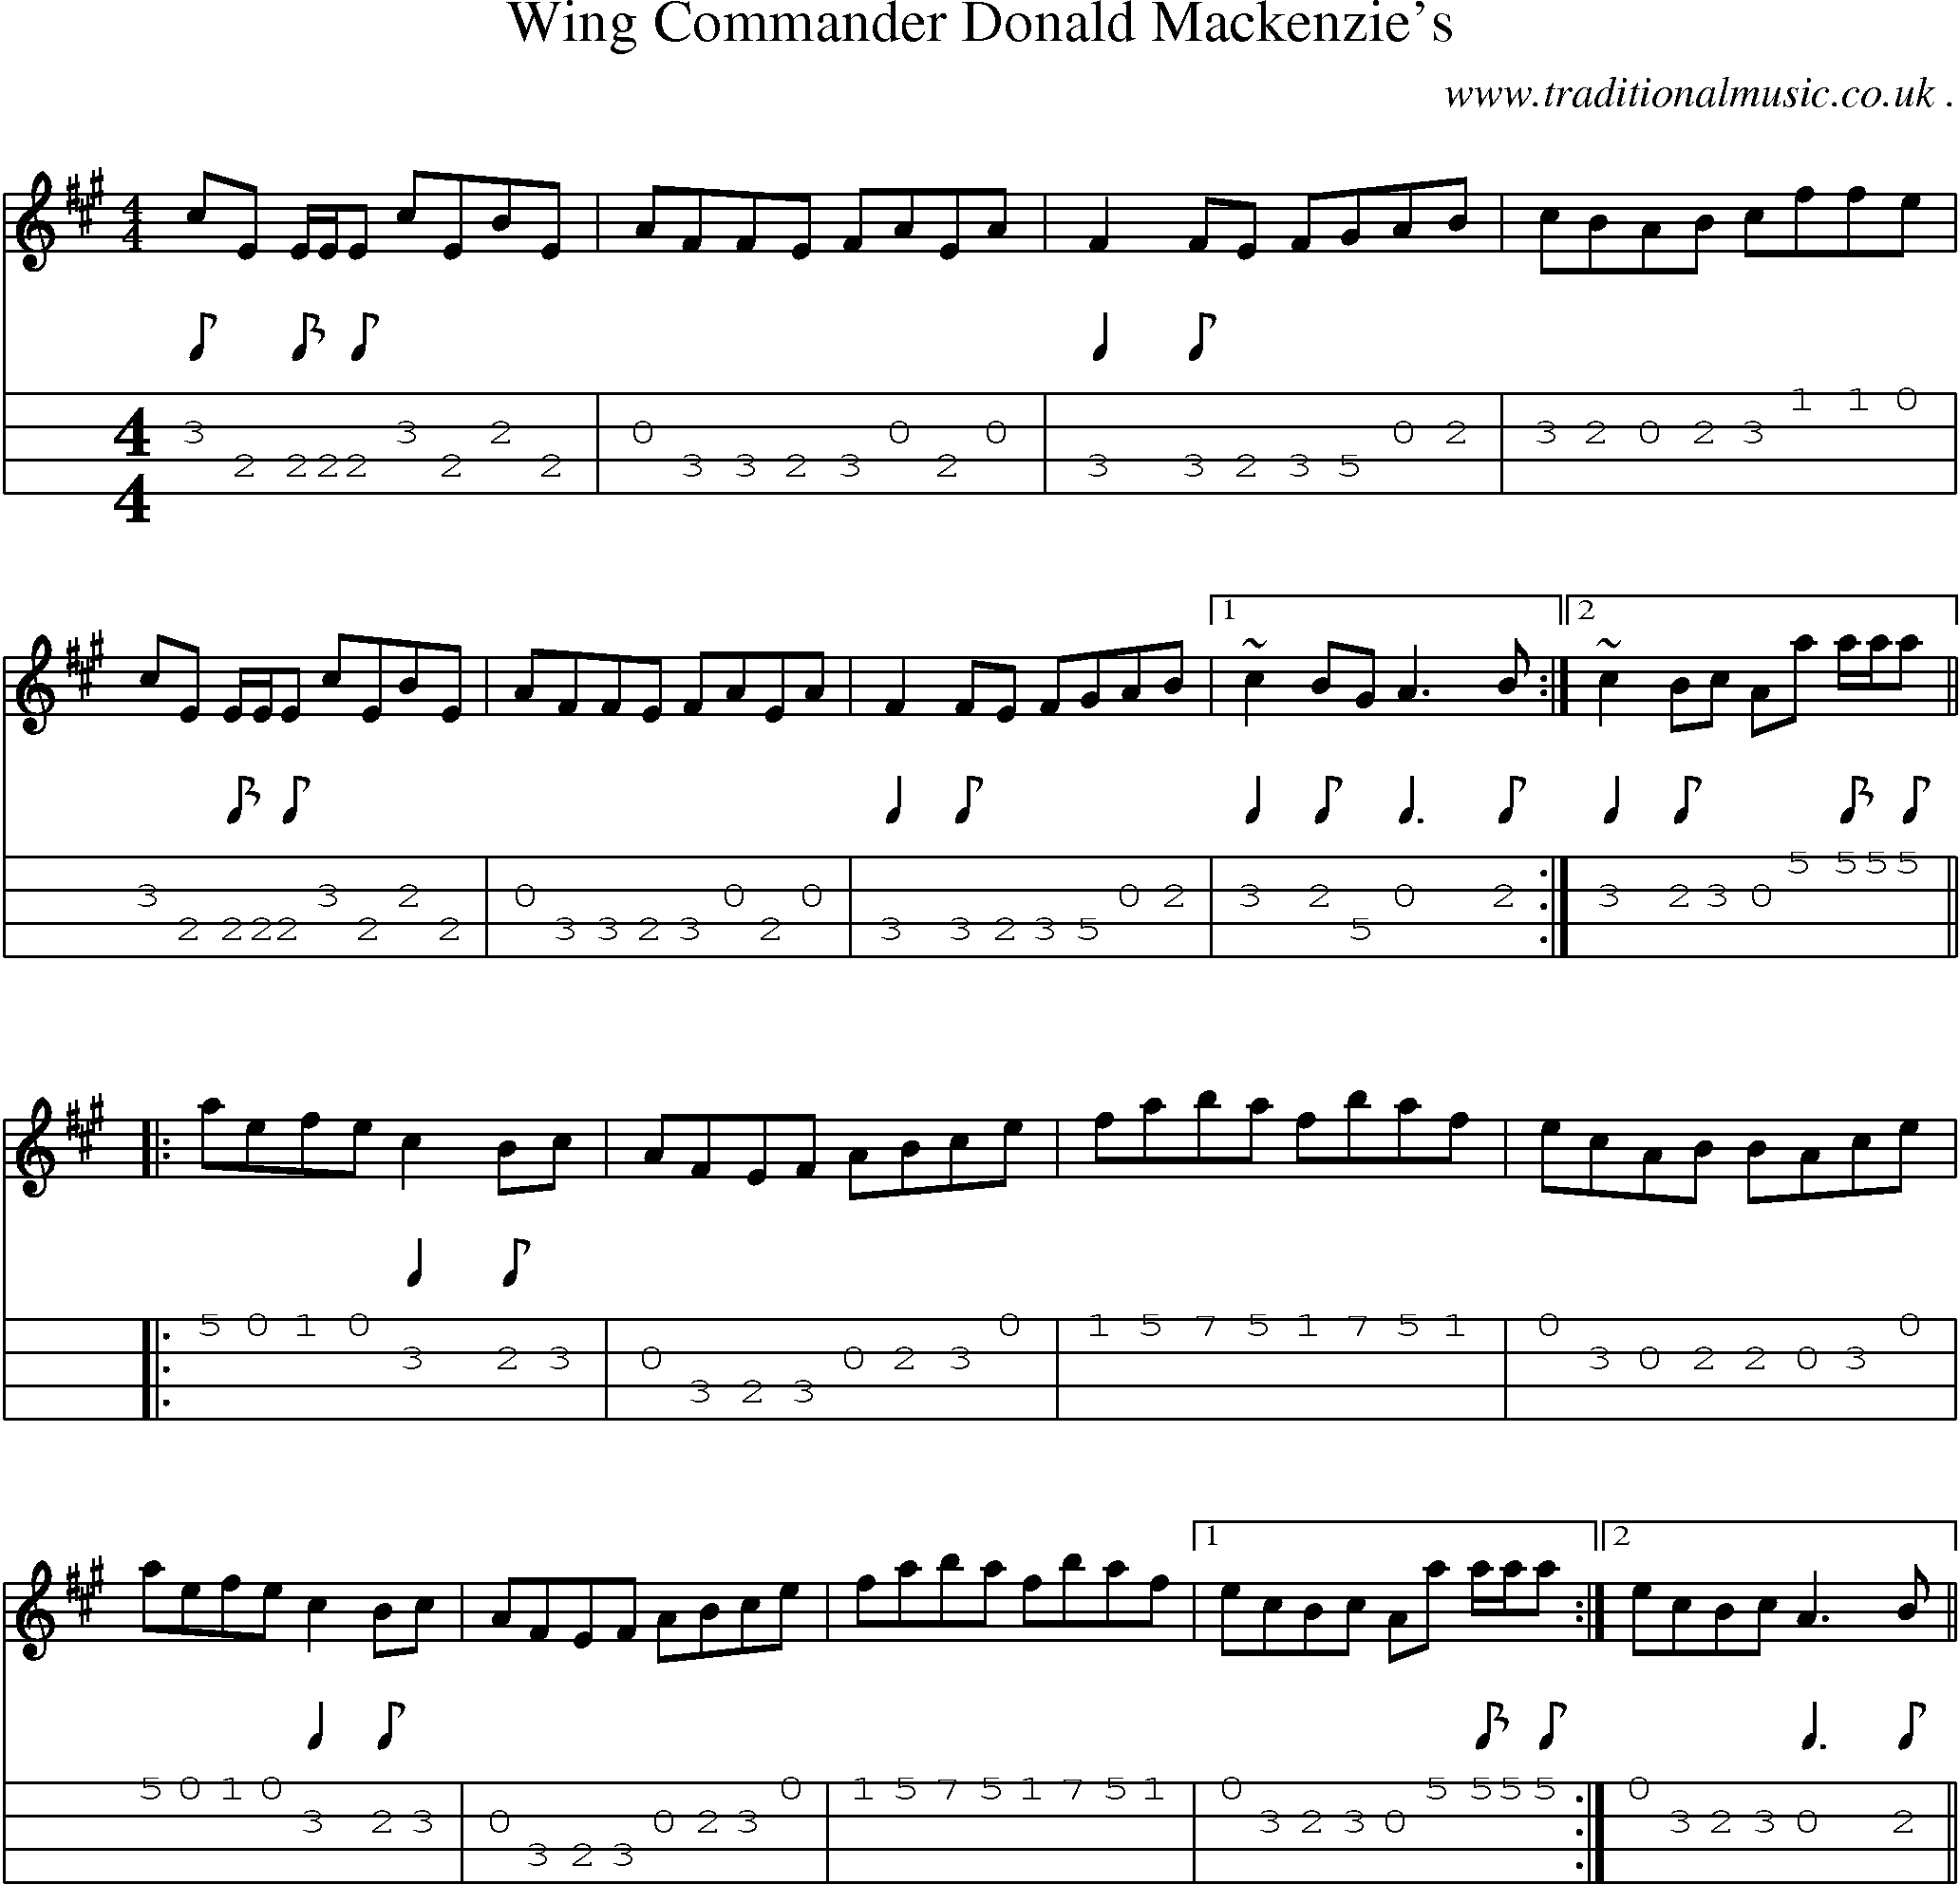 Sheet-music  score, Chords and Mandolin Tabs for Wing Commander Donald Mackenzies